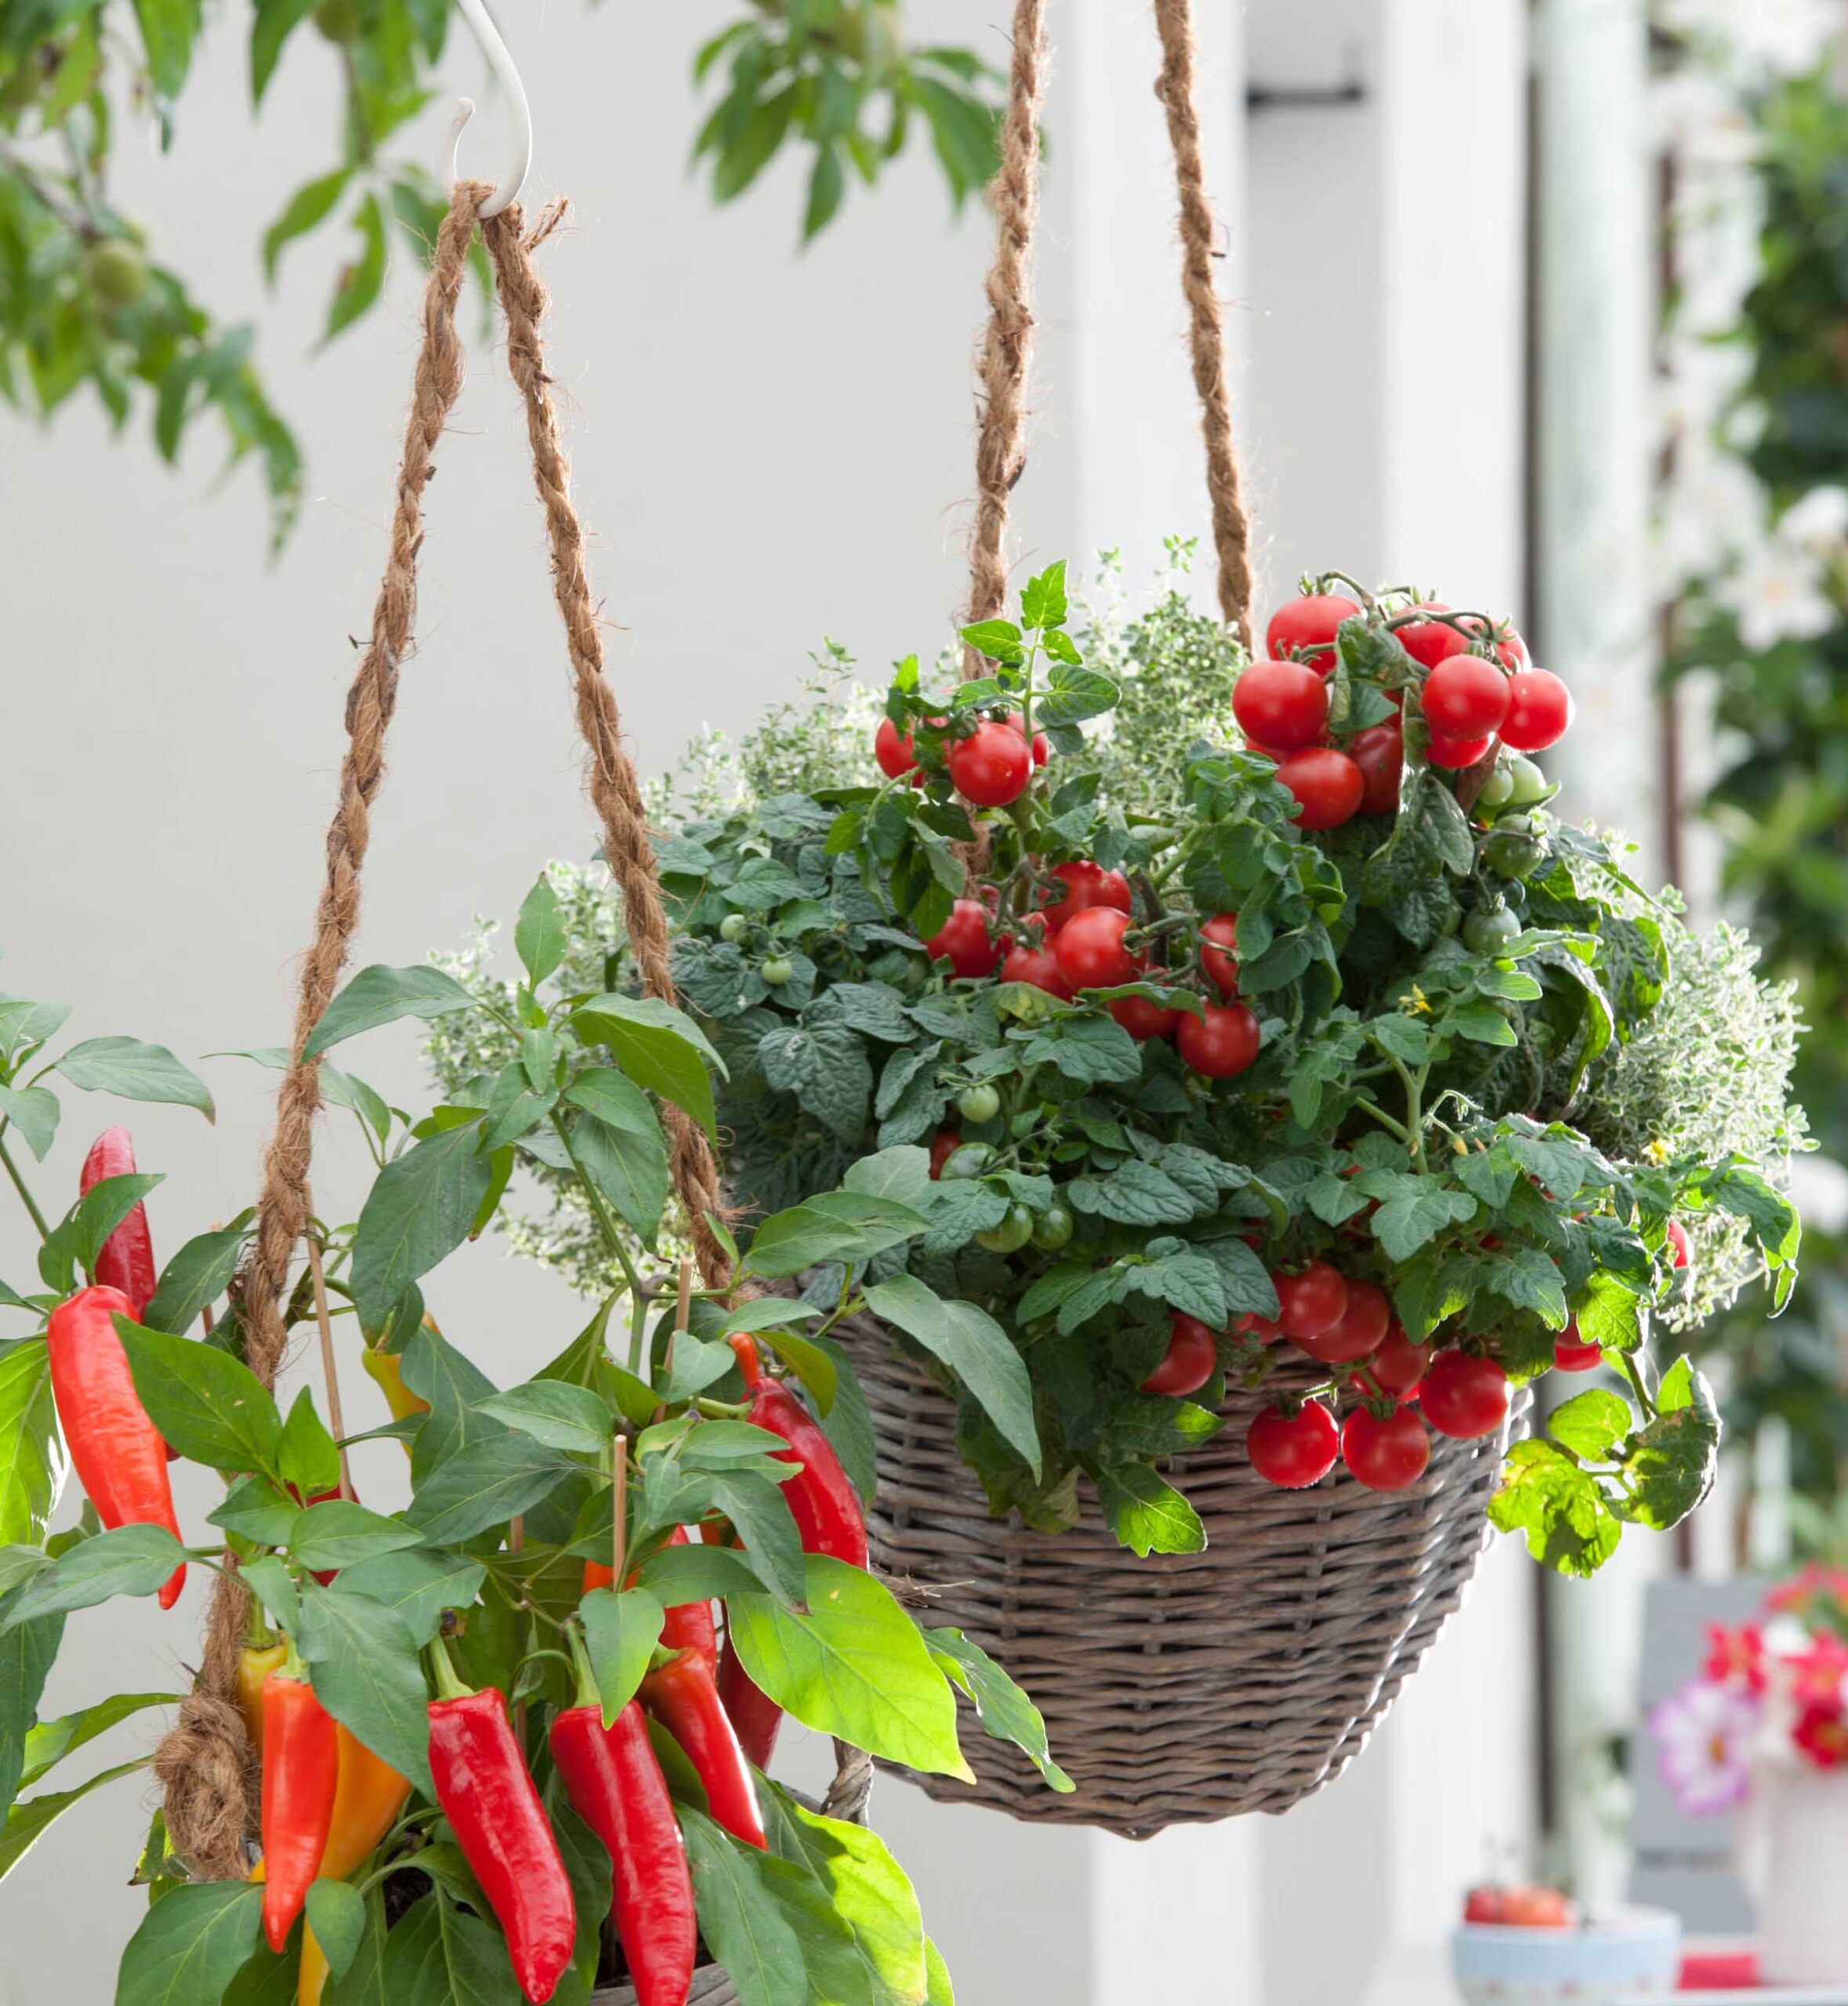 Growing tomatoes in pots and baskets